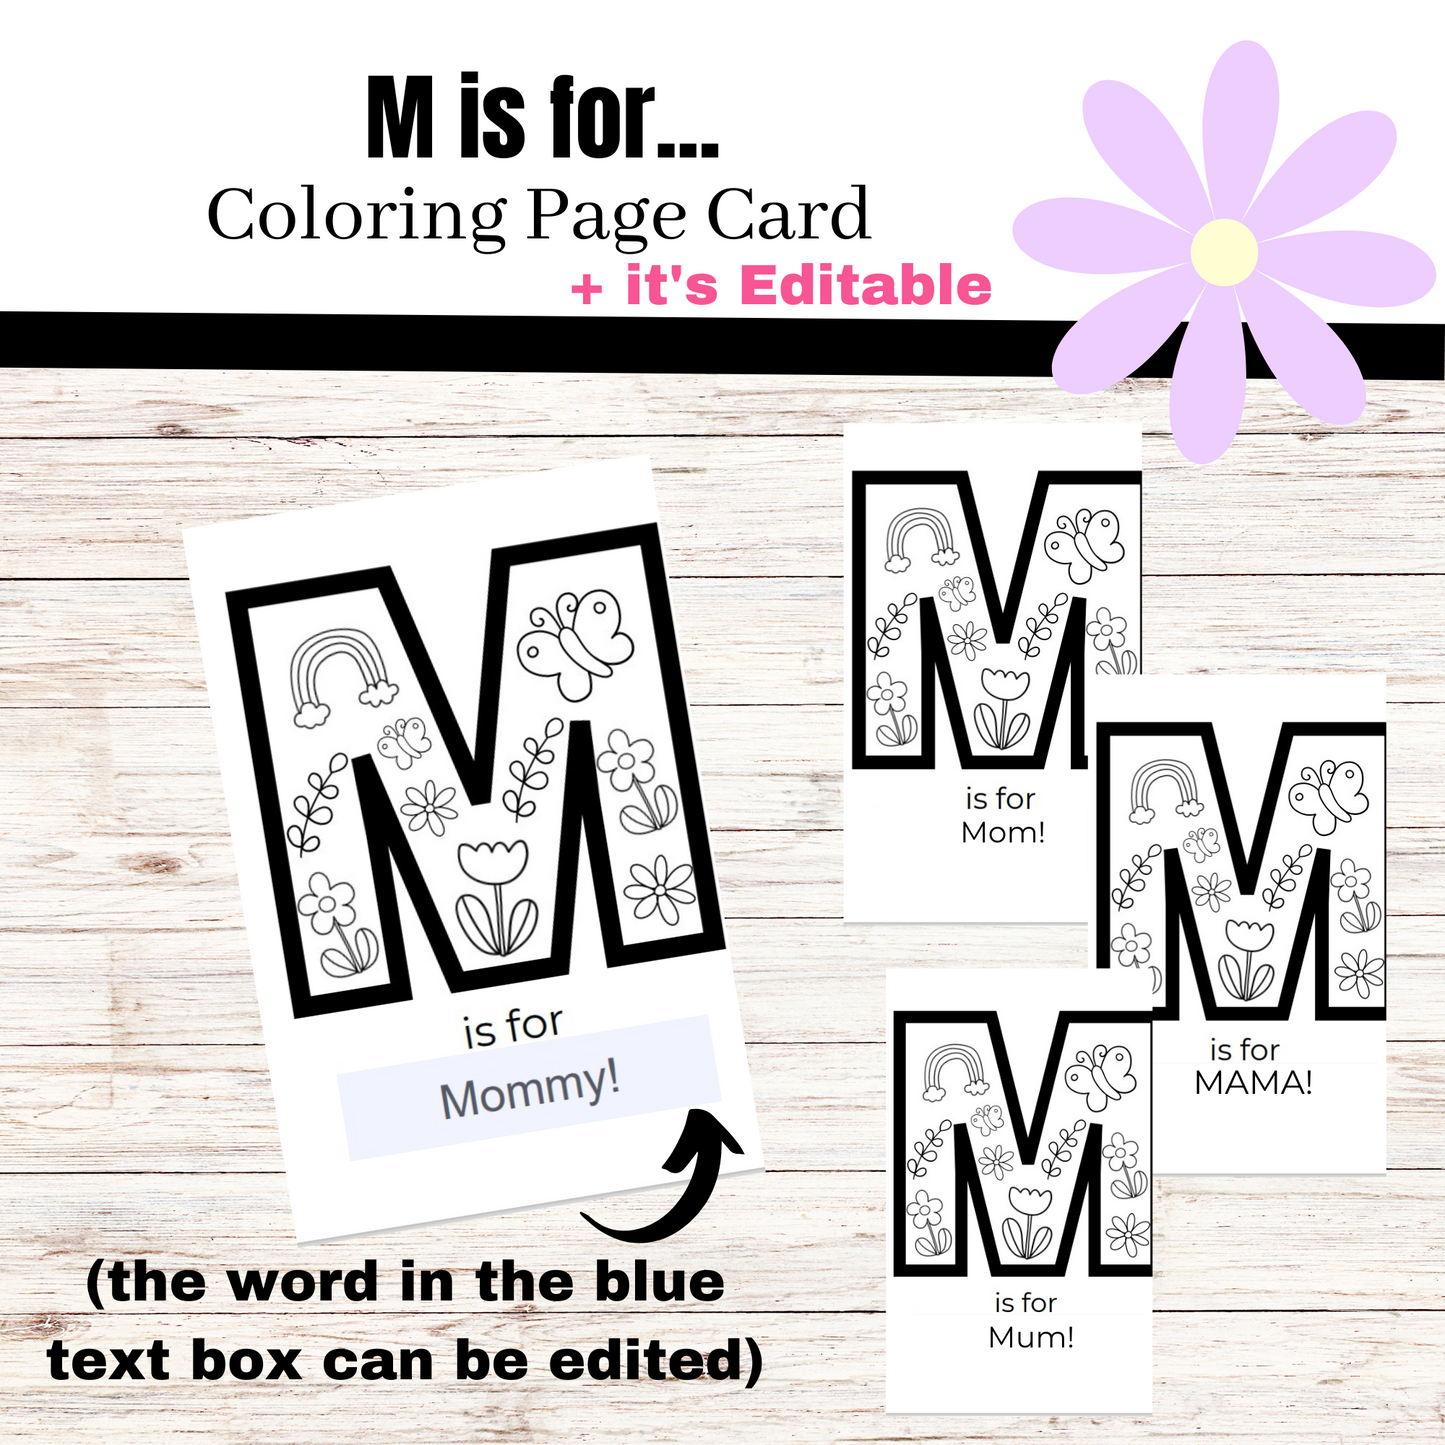 M is for.... Card to Color | Printable Mother's Day Coloring Page Card